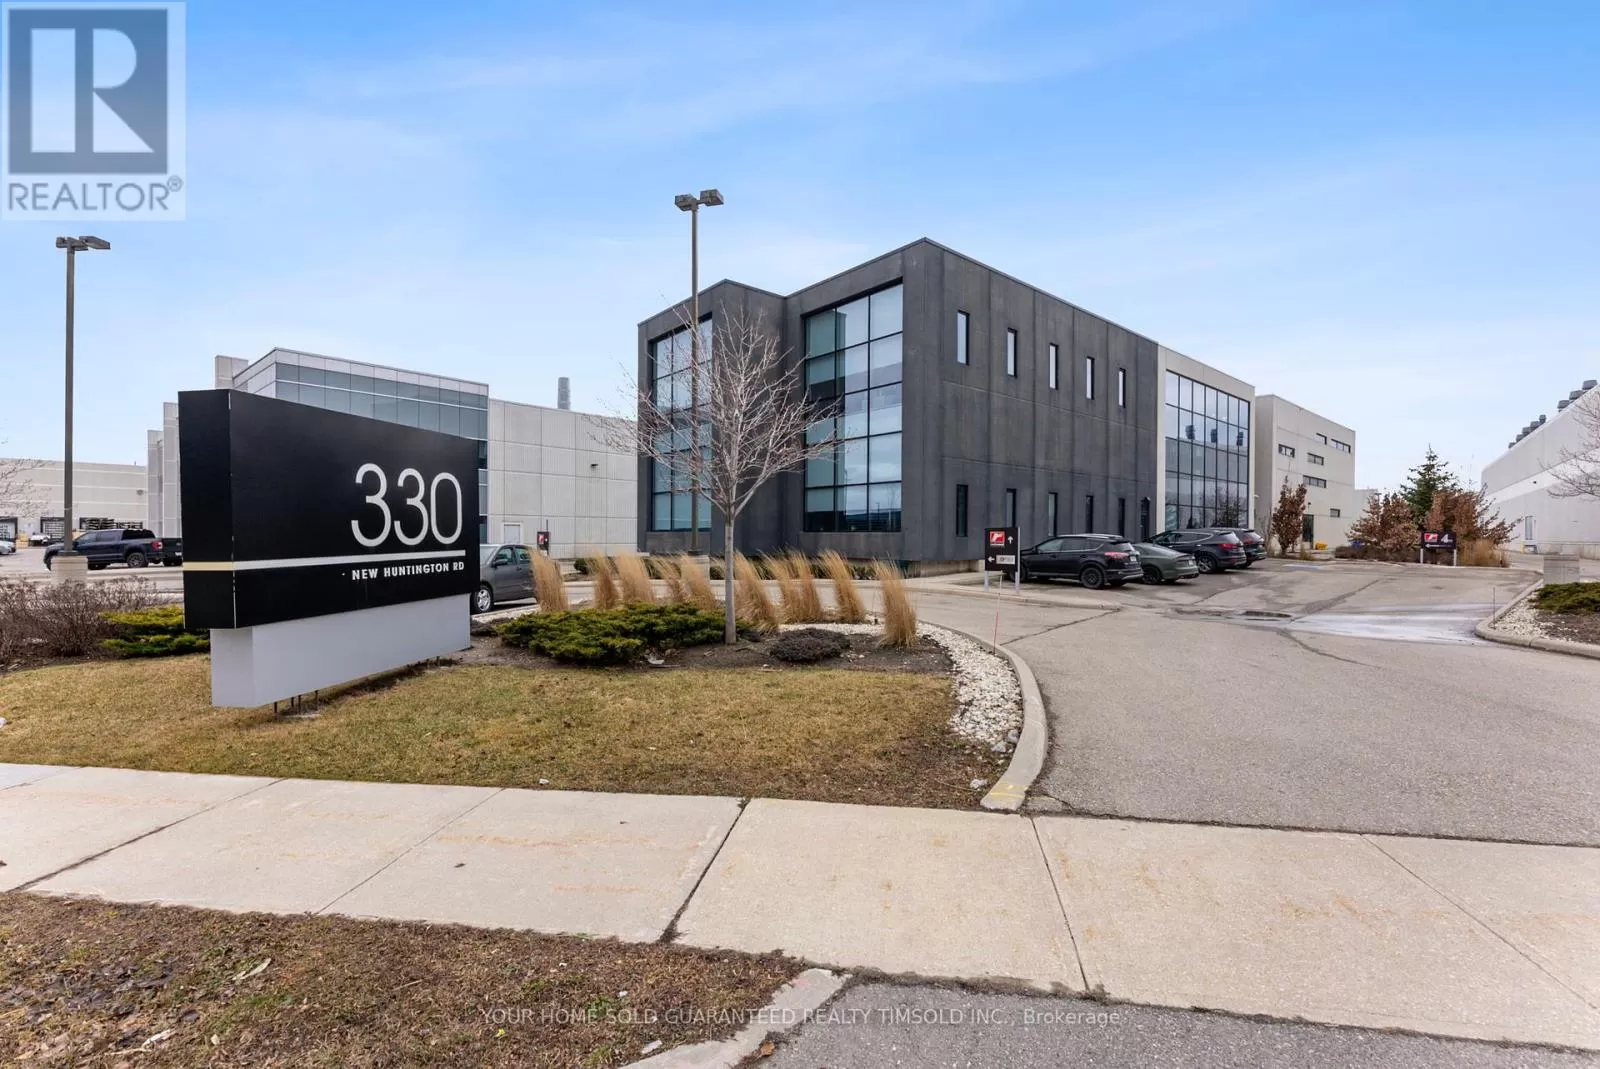 Offices for rent: 101 - 330 New Huntington Road, Vaughan, Ontario L4H 0R4